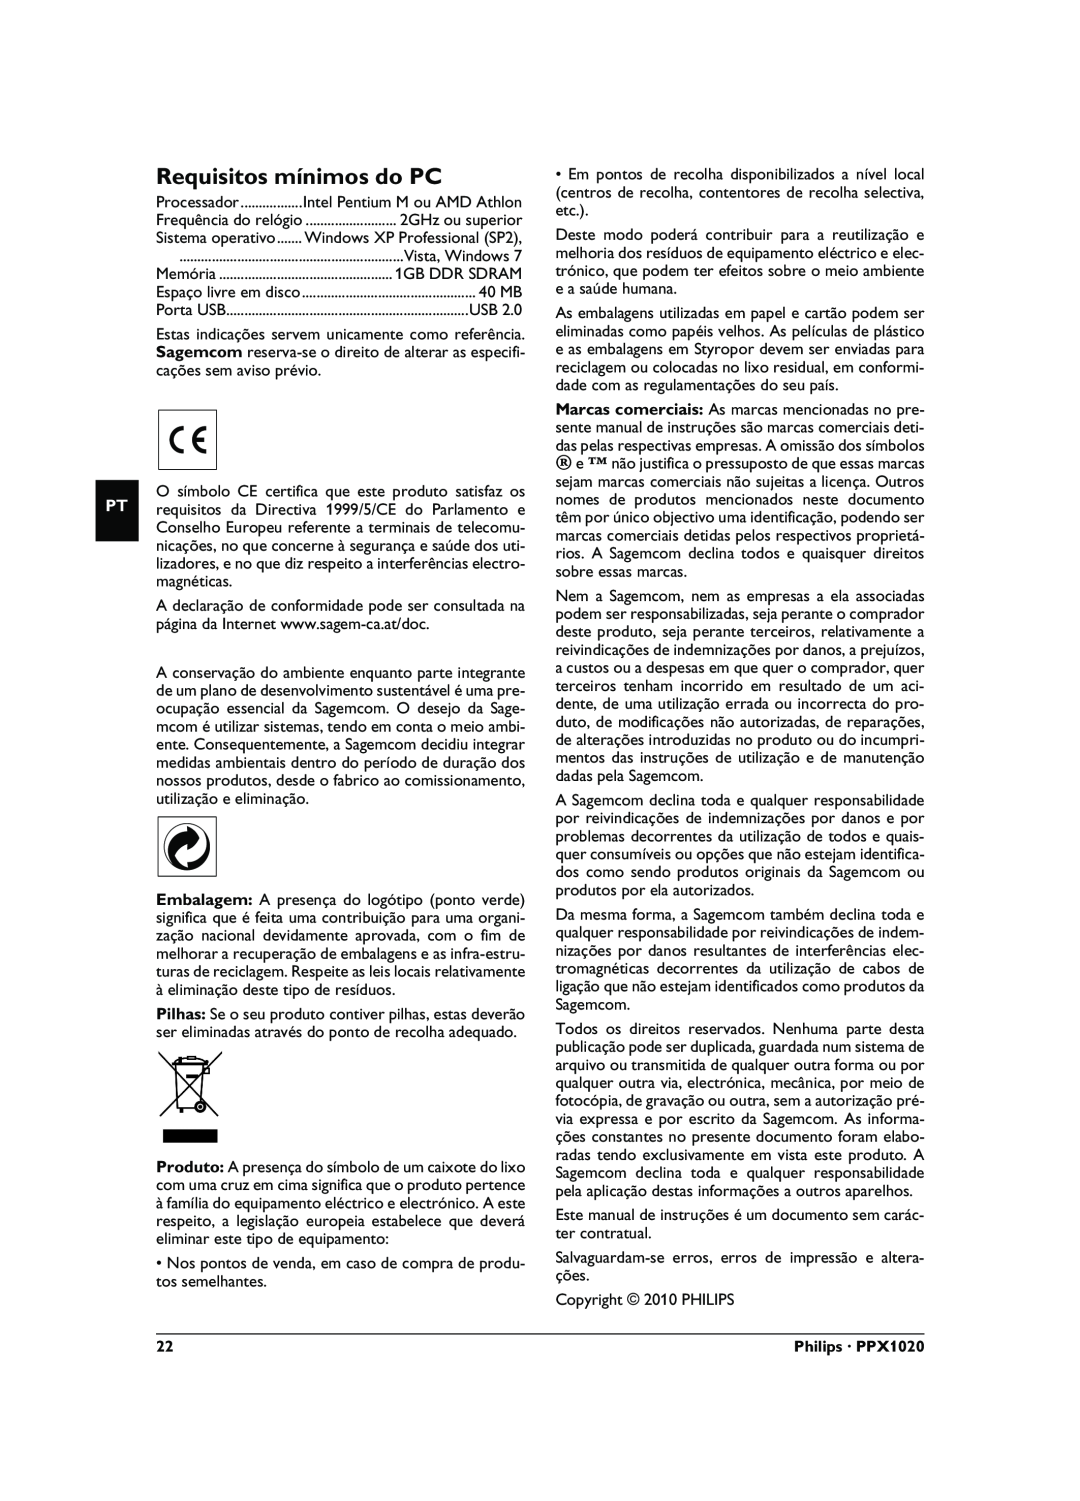 Philips PPX1020 user manual Requisitos mínimos do PC 